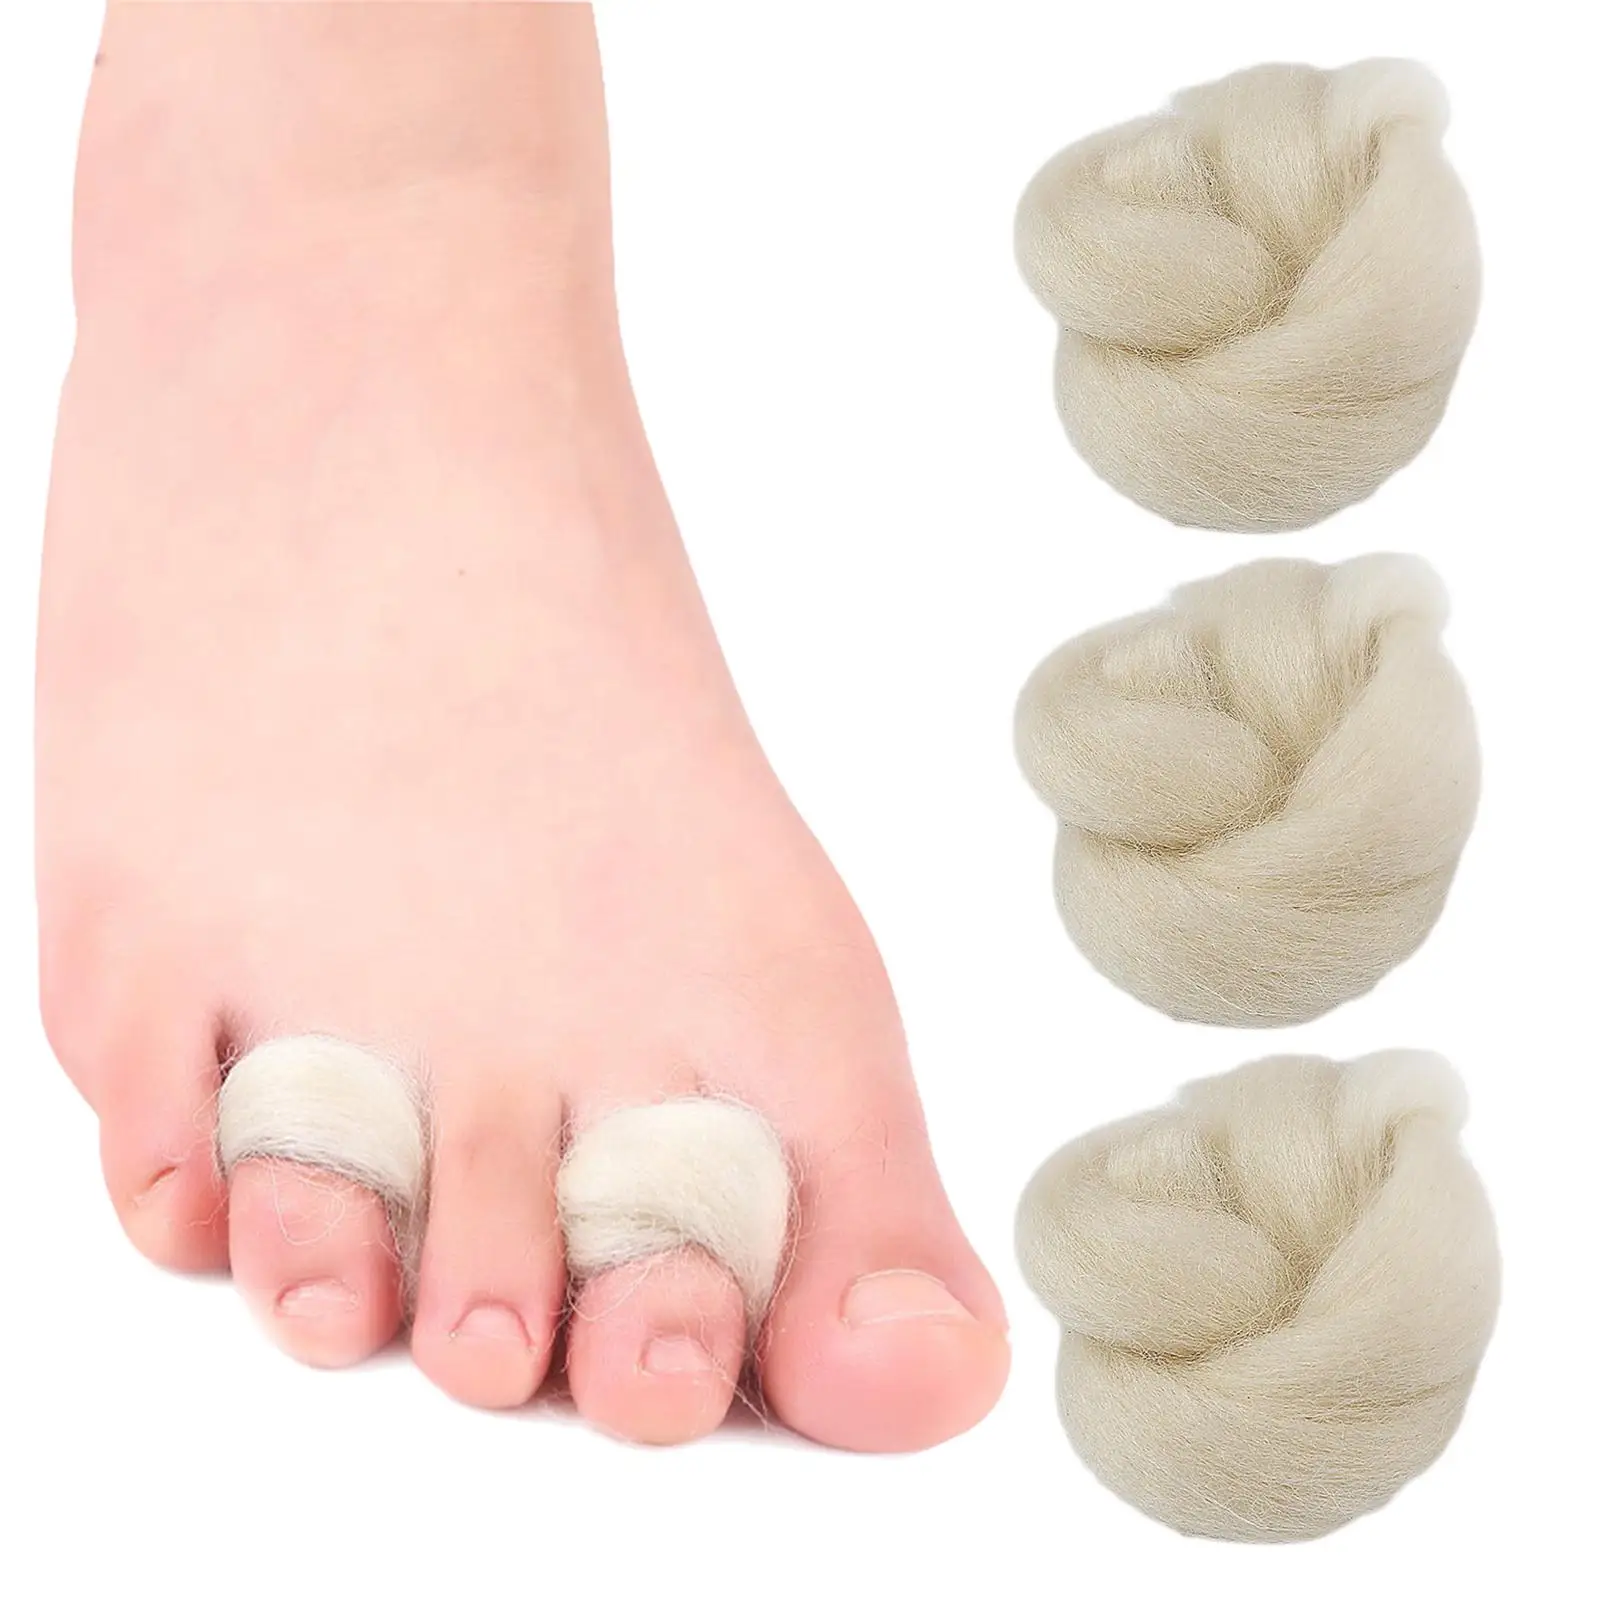 3 Count Wool Feet Cushioning Toe Separator Reduce Blisters Premium Reusable Hiking Blister Pads